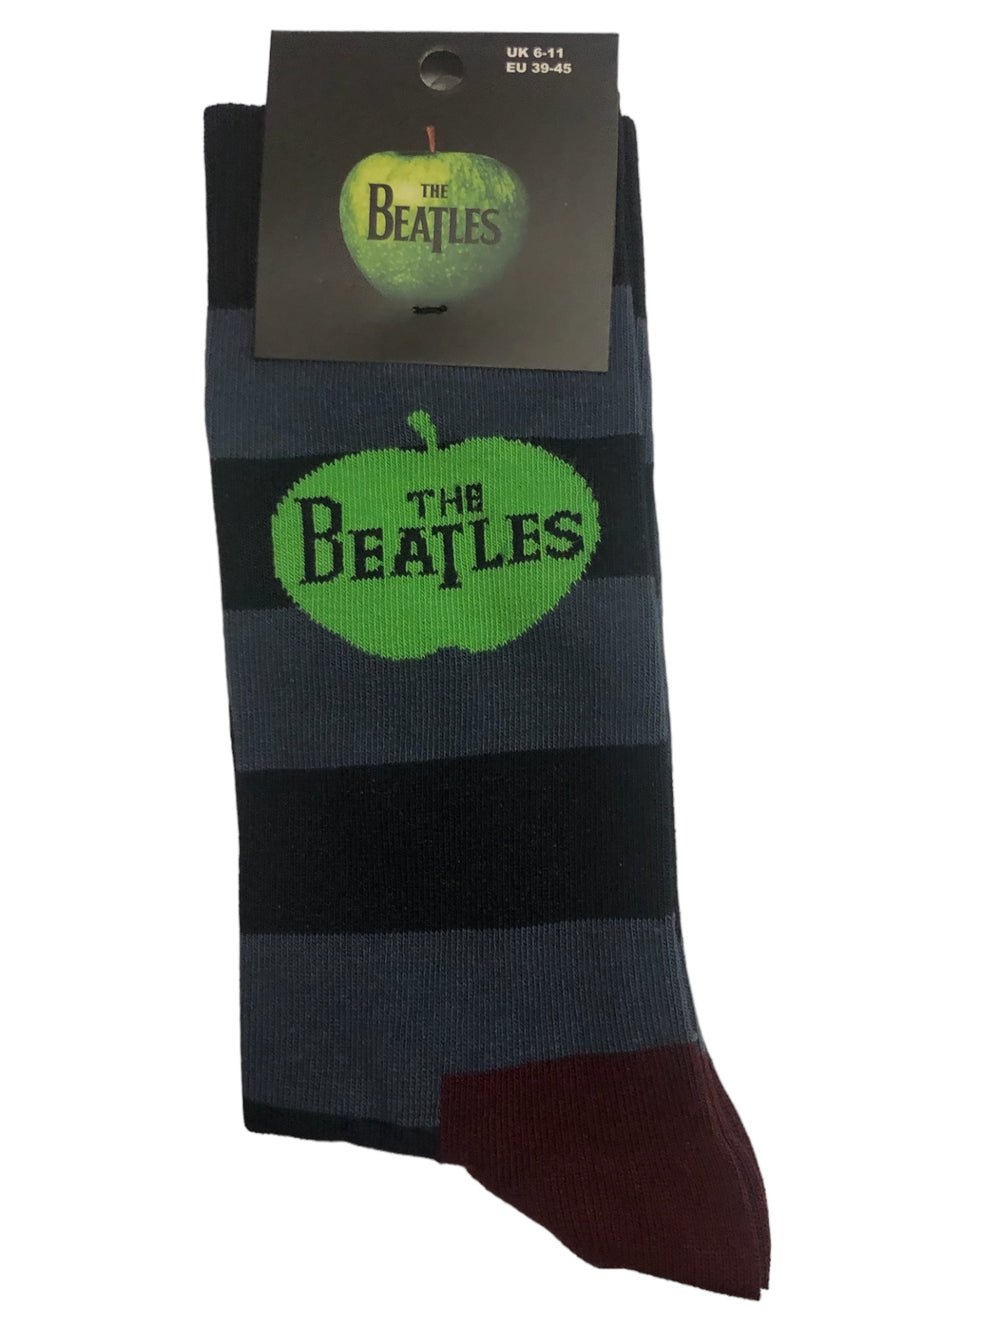 The Beatles Appel & Stripes Official Beatles The Product 1 Pair Jacquard Socks Size 7-11 UK Brand New